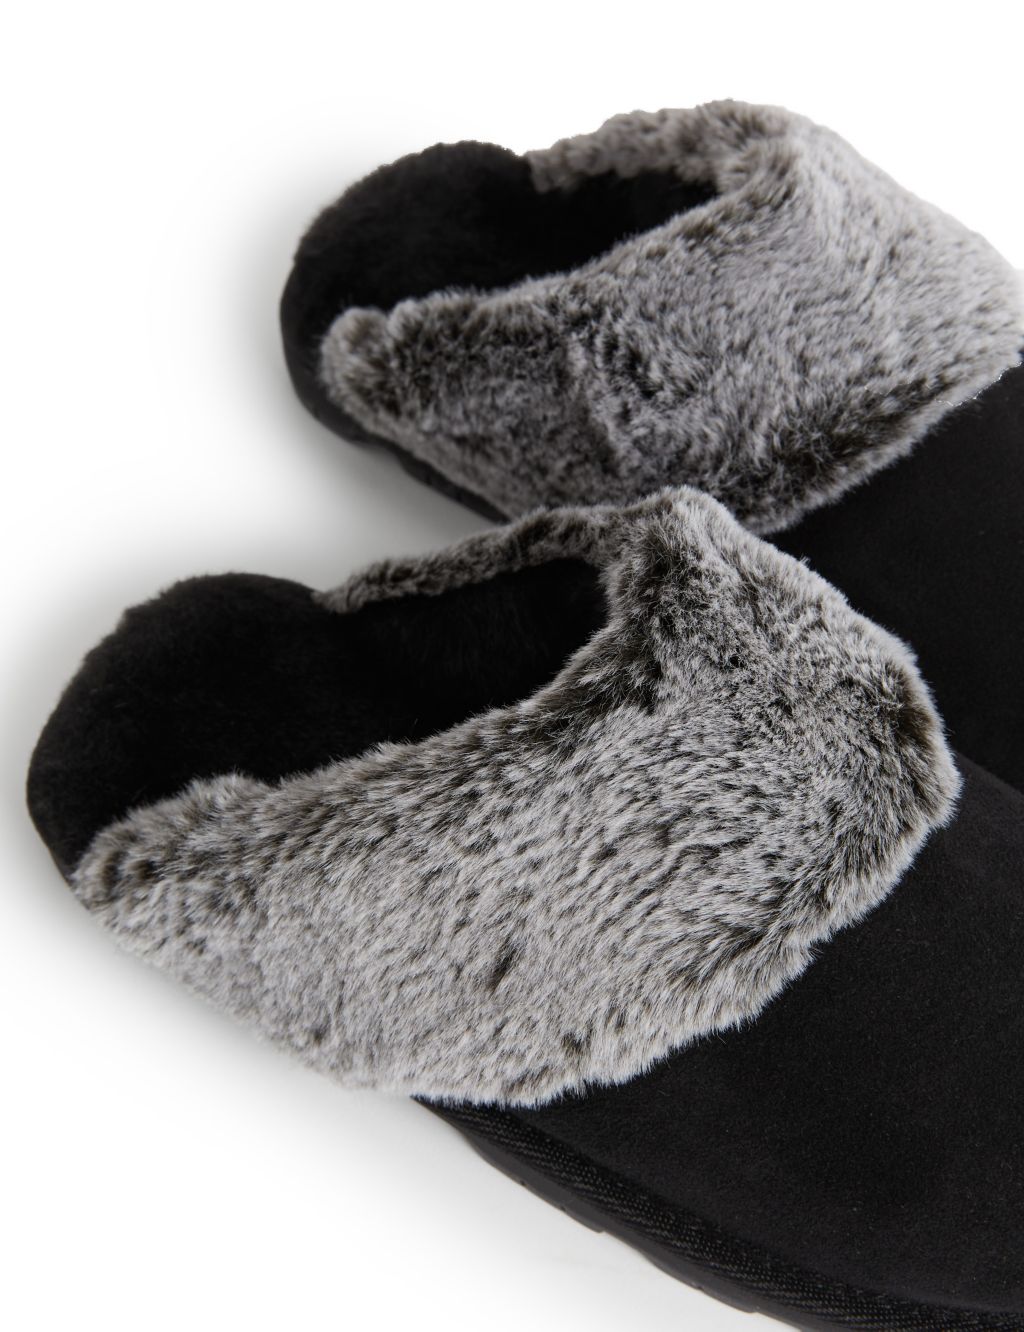 Suede Faux Fur Lined Mule Slippers image 3